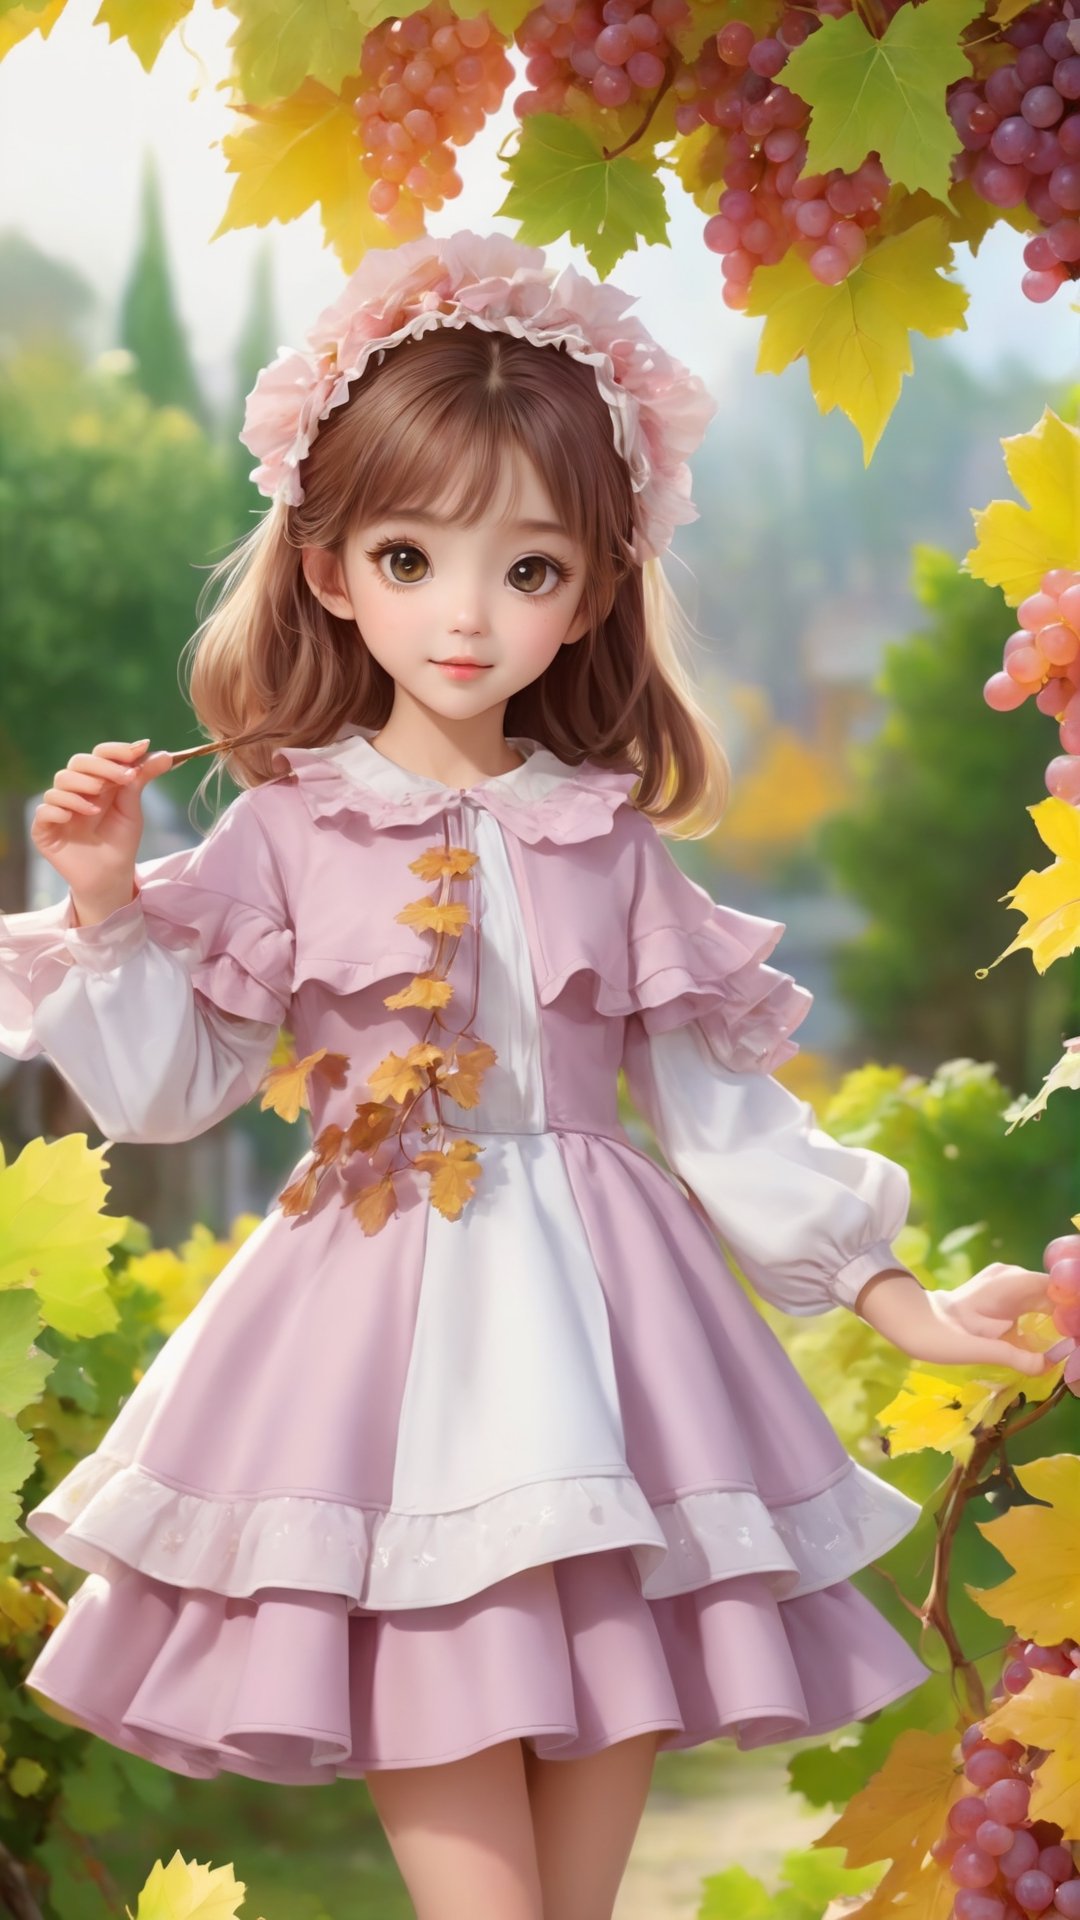 Side view, Autumn style, realistic high quality grapes tree, grapes full the branch, maple leaves falling, 1girl, big eyes so charming, happy,  under the tree have a table, and grape and beautiful flowers, maple leaves falling, and a adorable lovely cute big charming eyes girl wearing pink and white Ruffles dress and coat, holding juice 
 near flowers, Turn around and look viewers , pink flowers blooming fantastic amazing and romantic lighting bokeh, yellow flowers blooming realistic and green plants amazing tale and lighting as background, Xxmix_Catecat